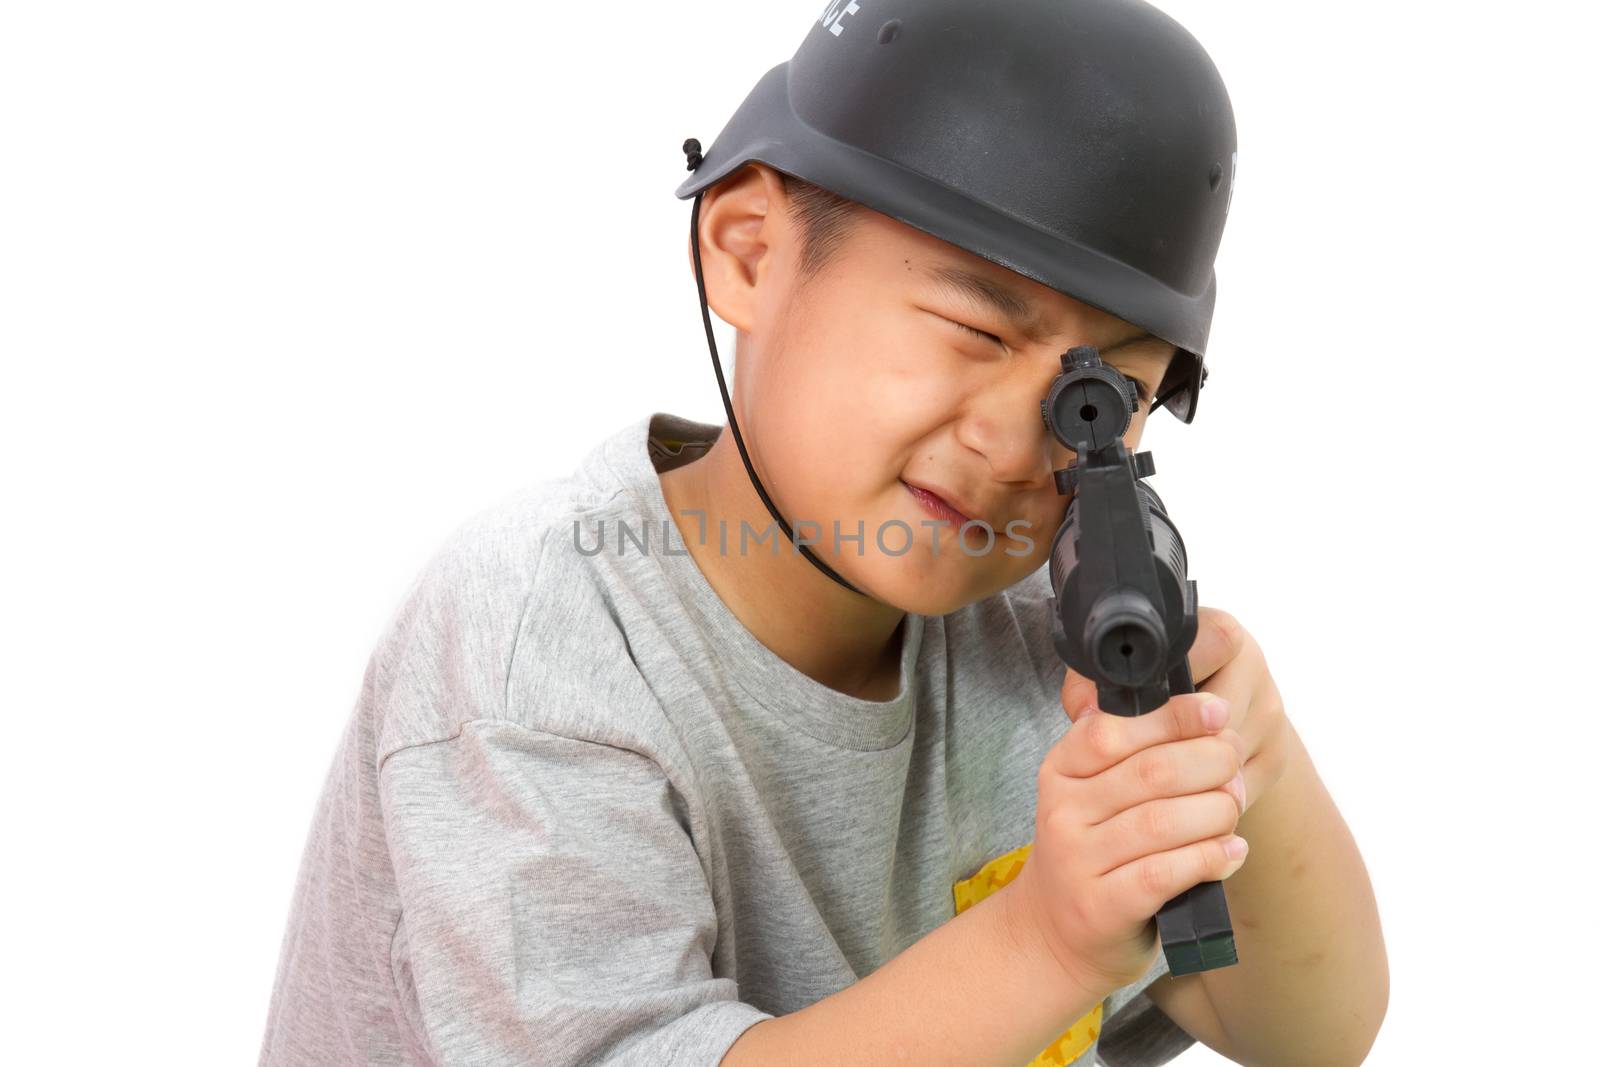 Asian Little Boy Playing Plastic Toy AK47 with Police Helmet by kiankhoon